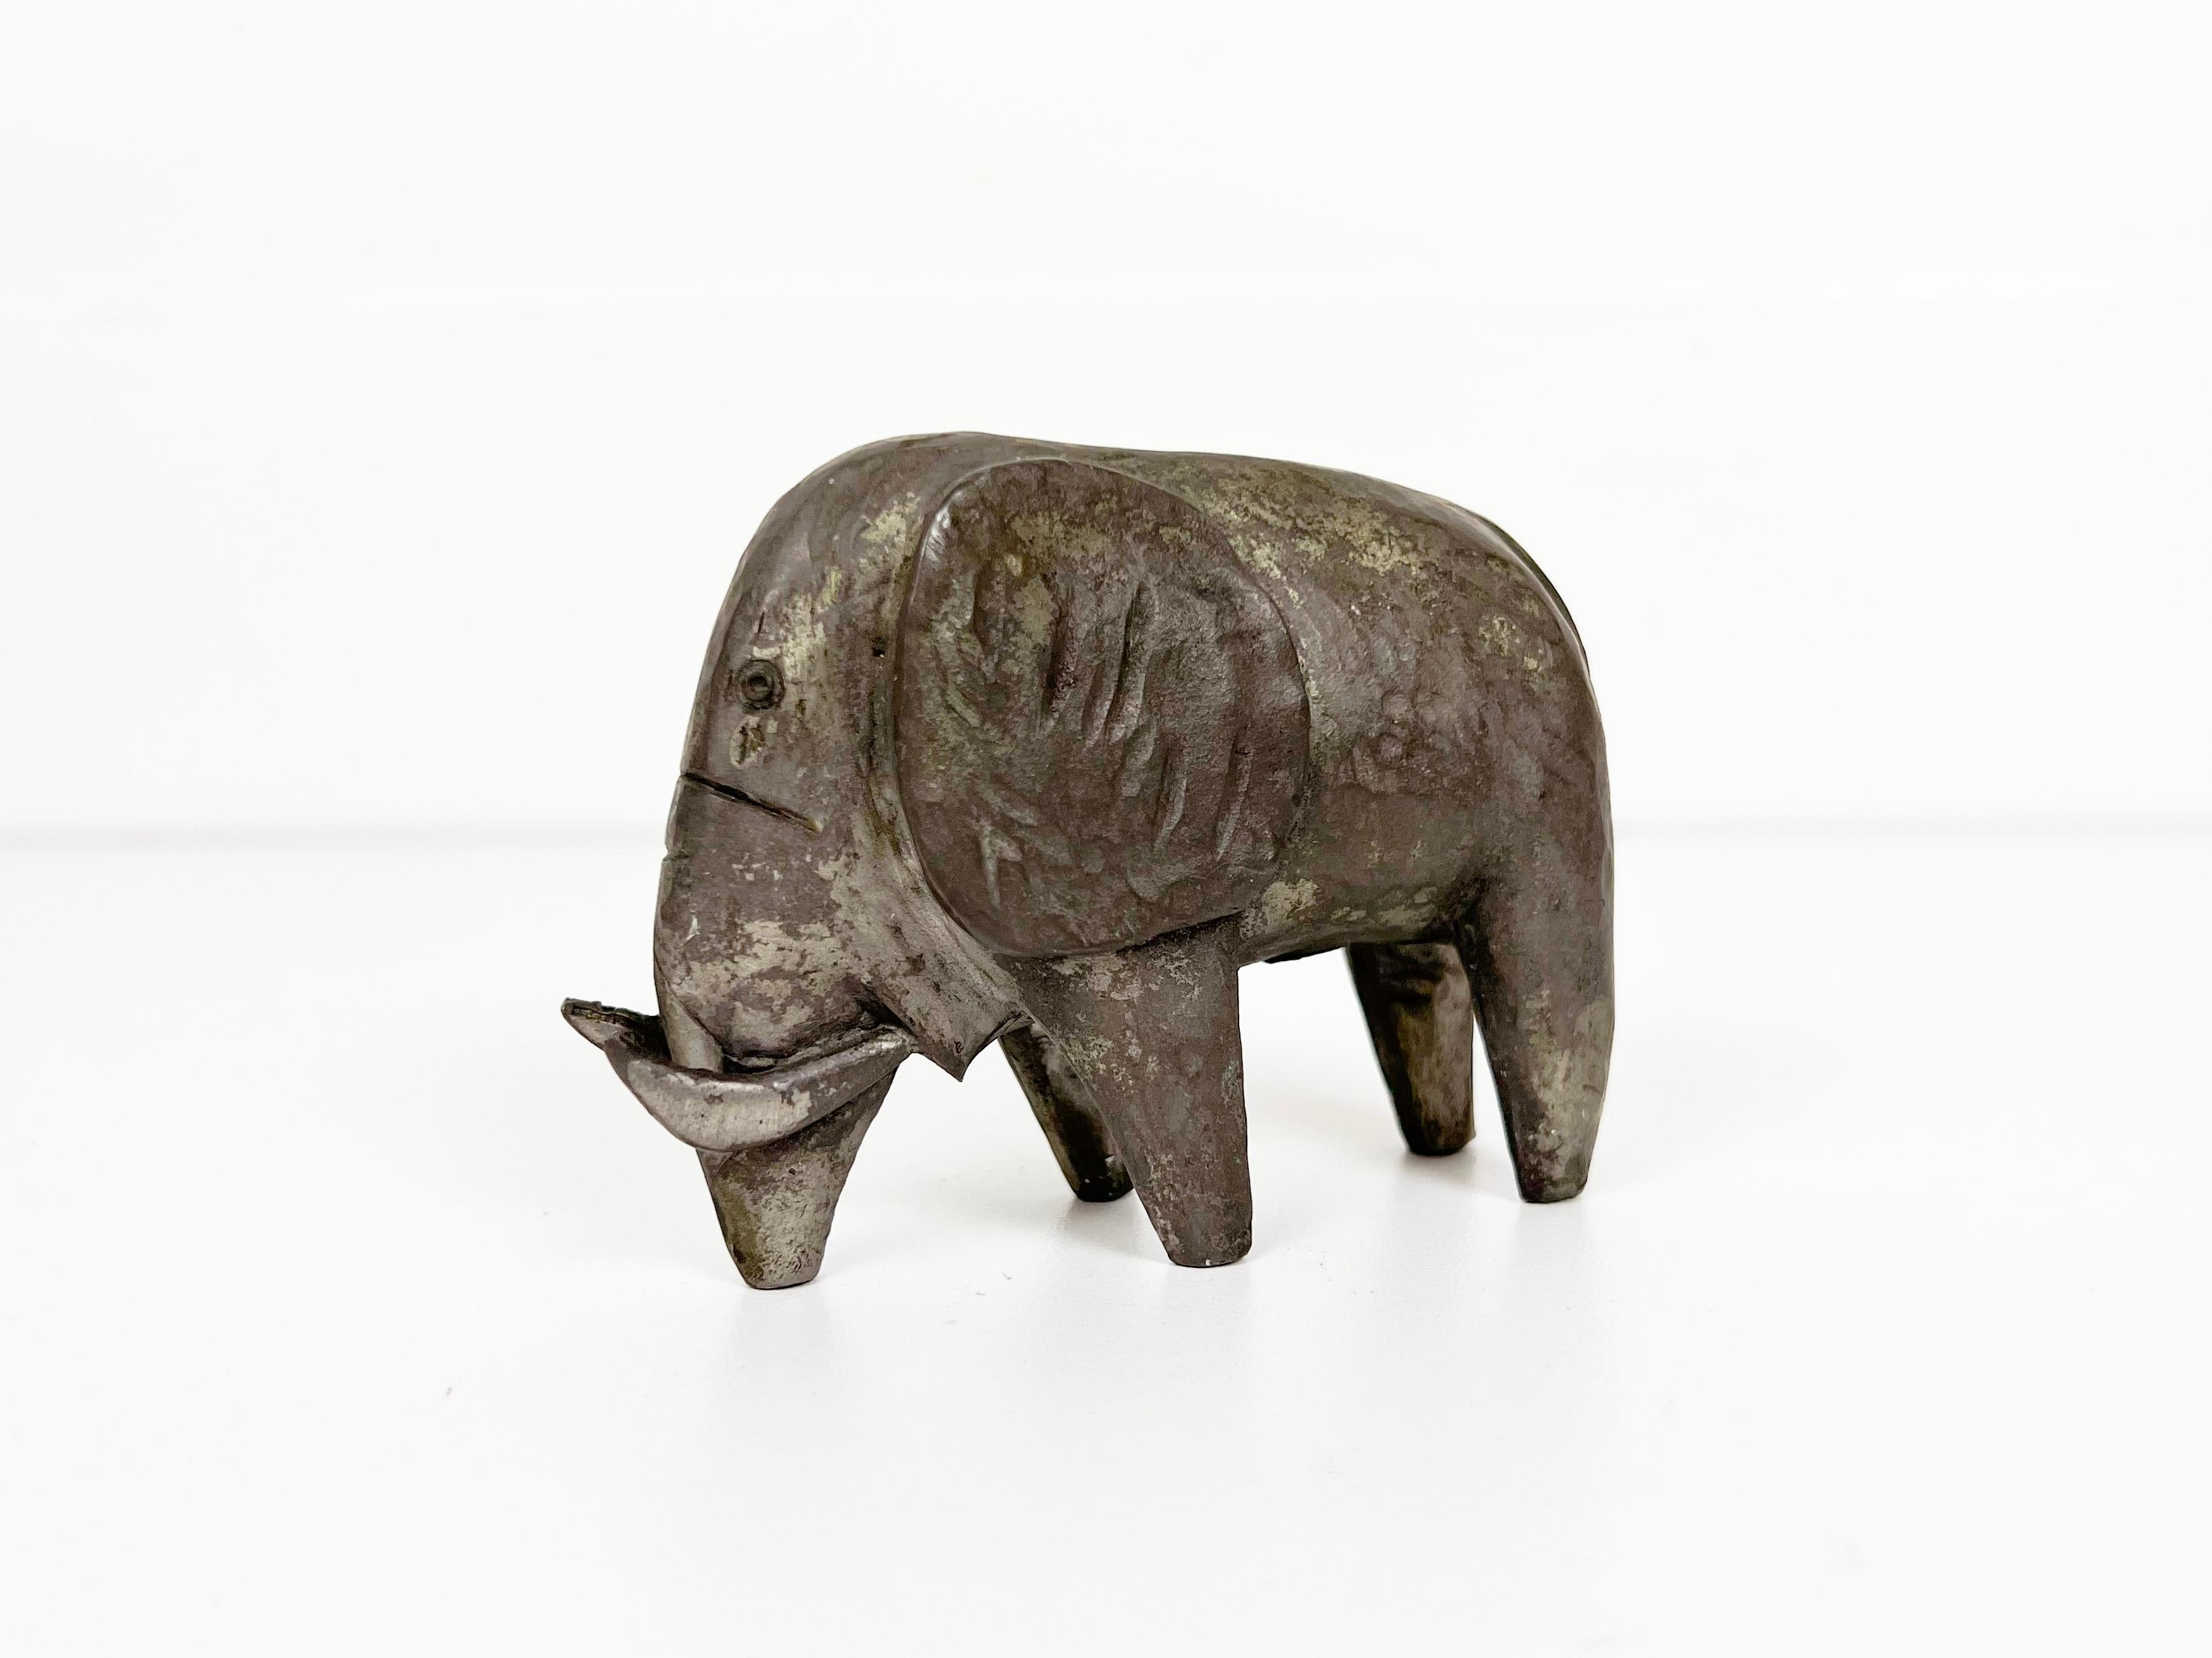 Vintage mammoth figurine made of solid pewter by Stieff for the Smithsonian Museum. Signed on underside. 

Maker: Stieff

Year: 1970s

Dimensions: 3.75